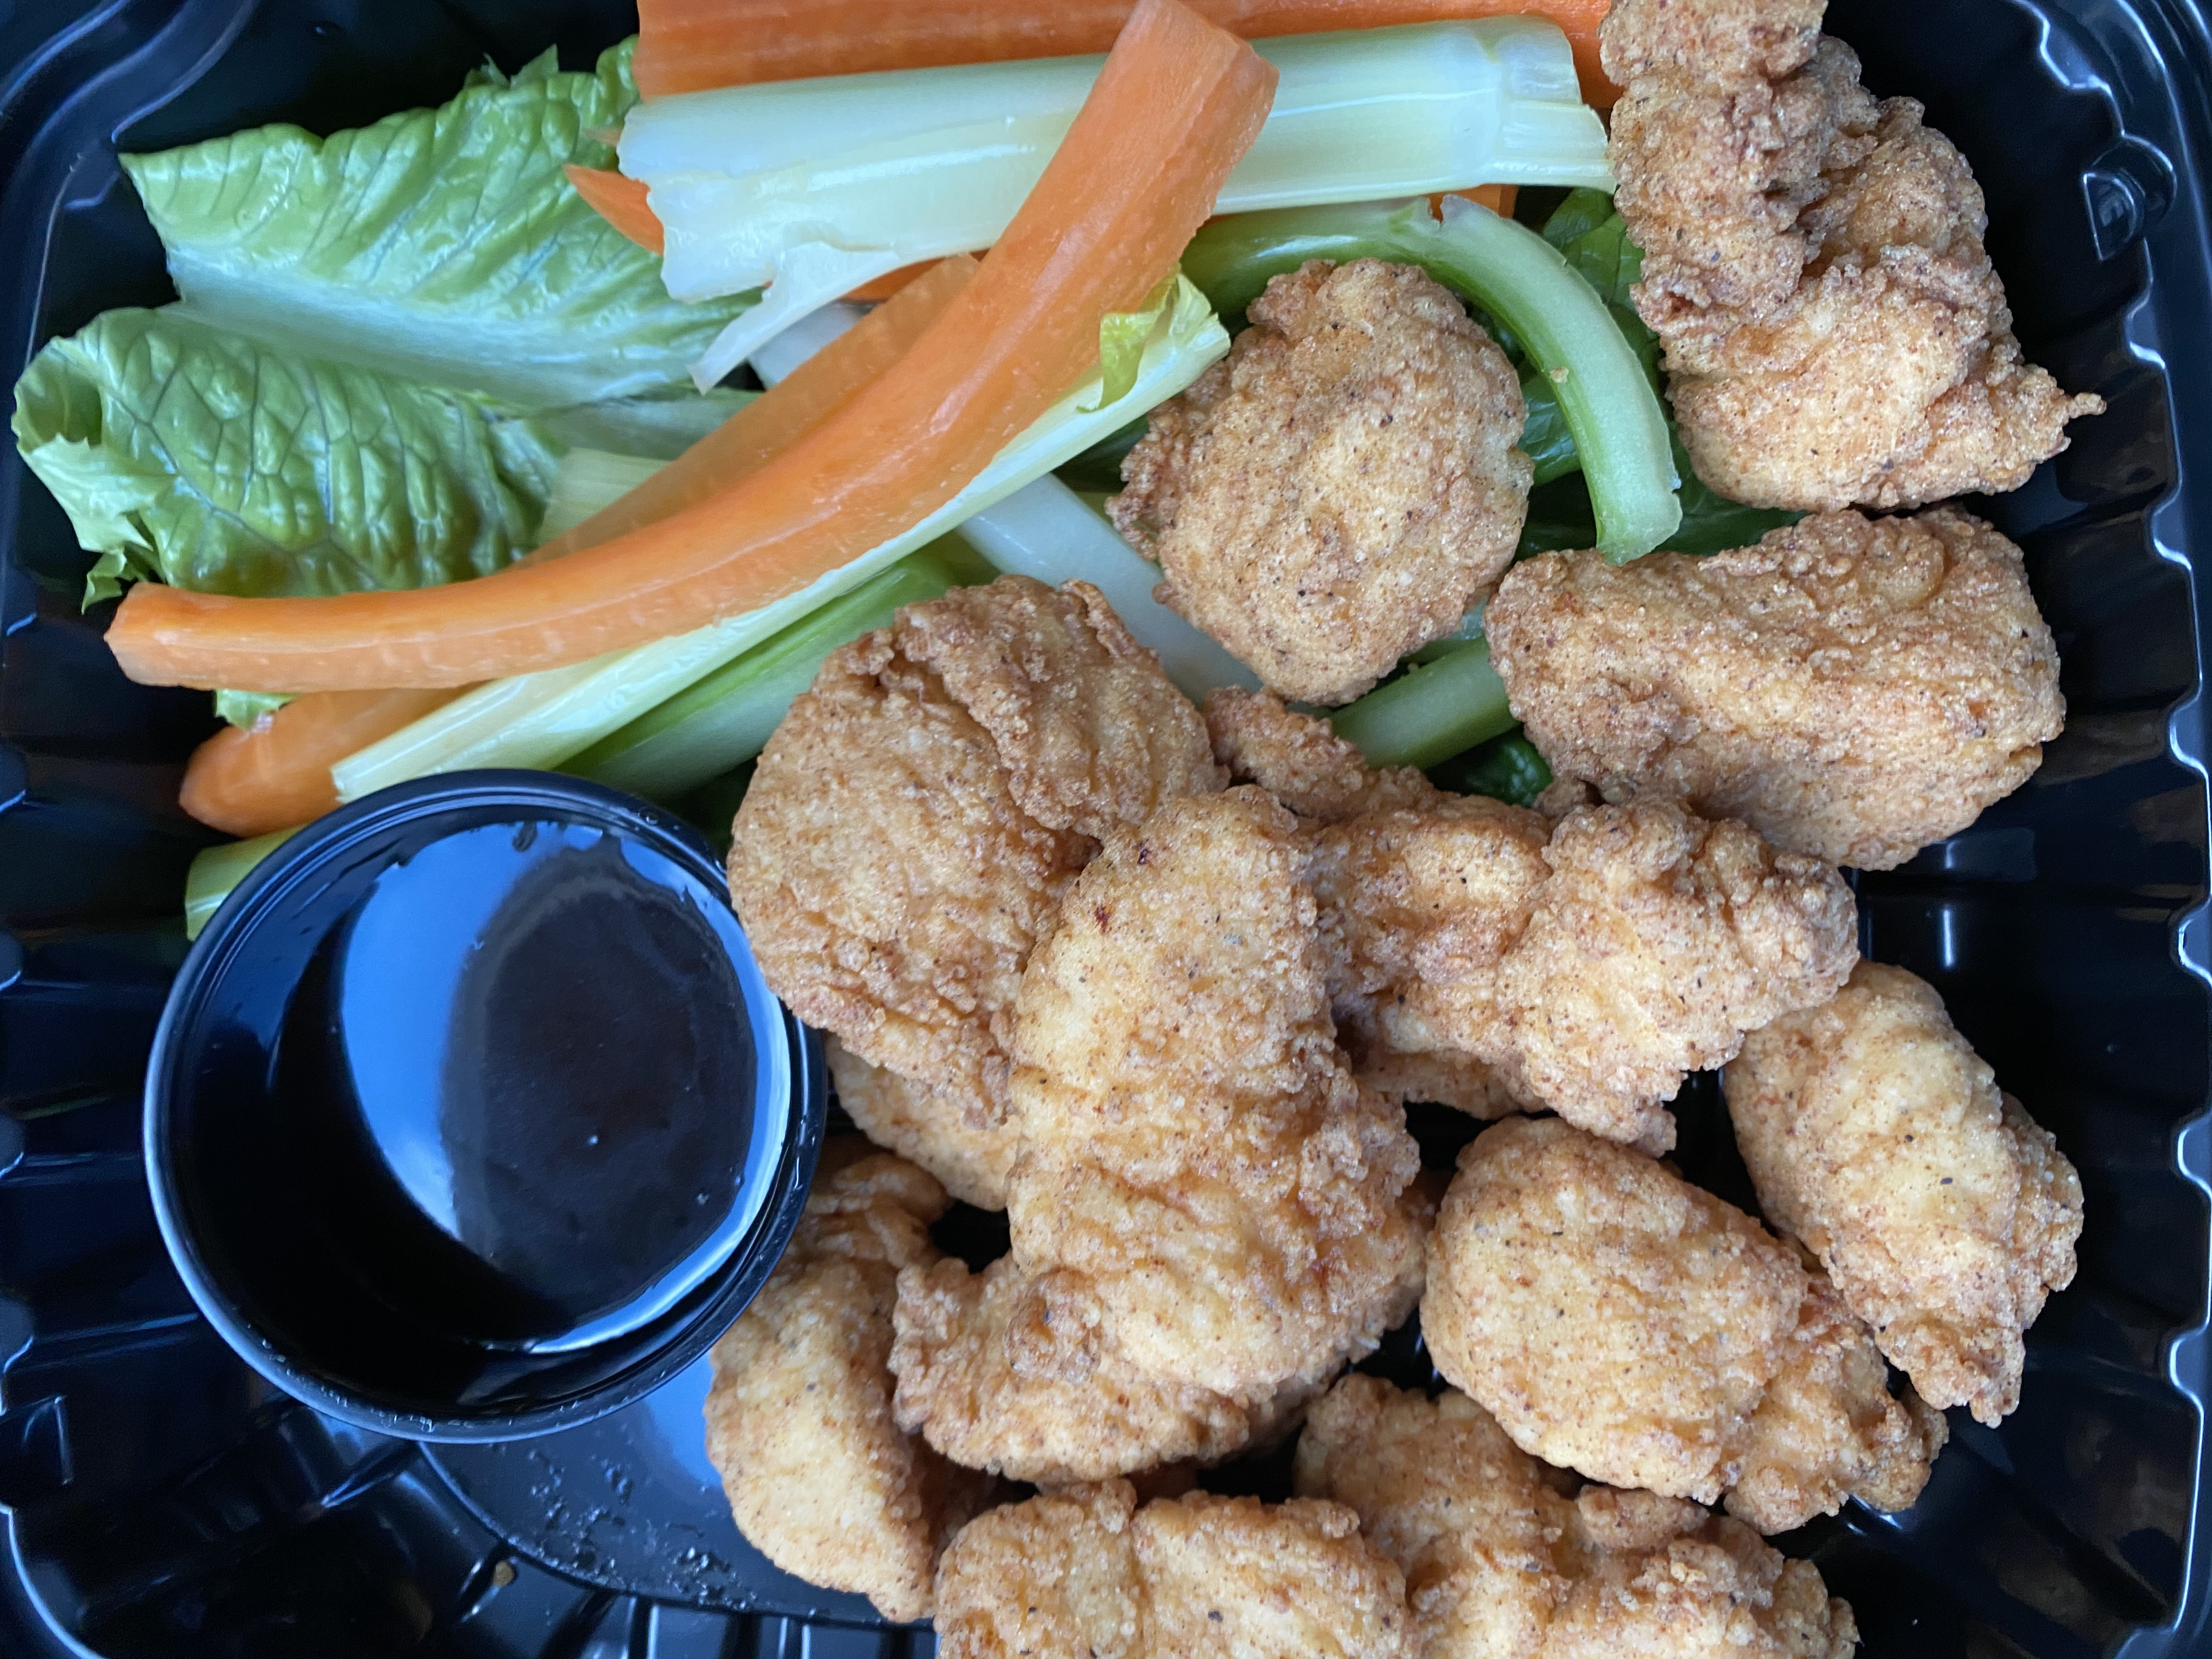 Best chicken nuggets on Cape Cod?